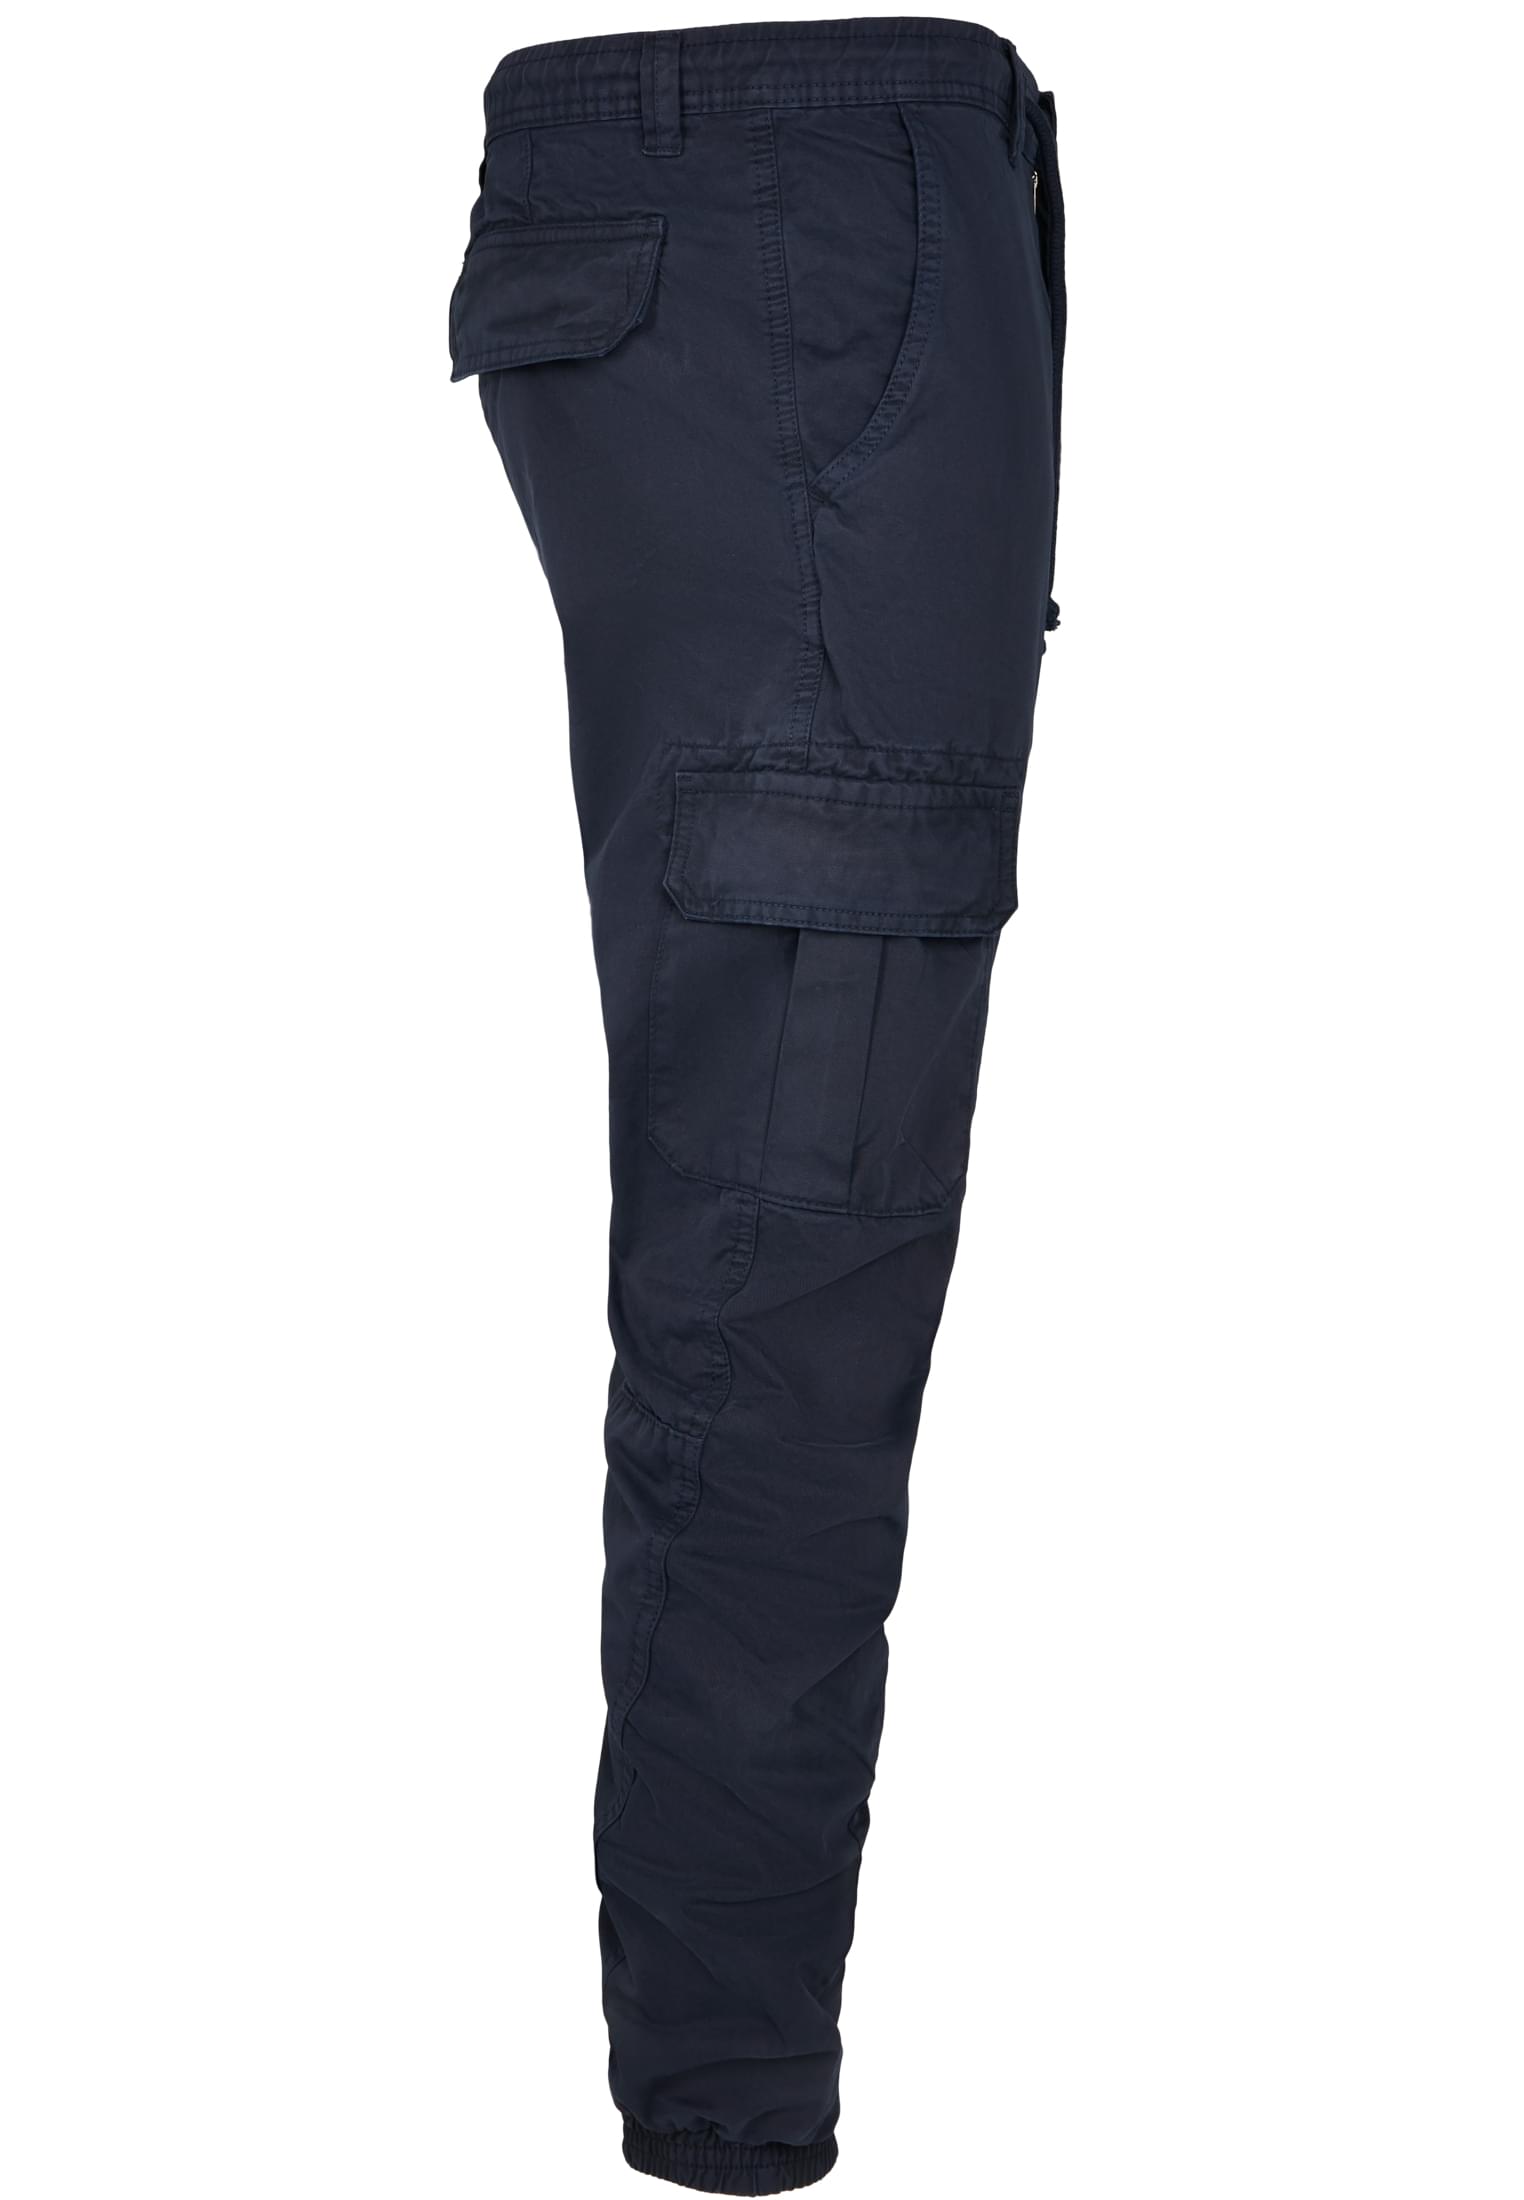 Sweatpants Cargo Jogging Pants in Farbe navy